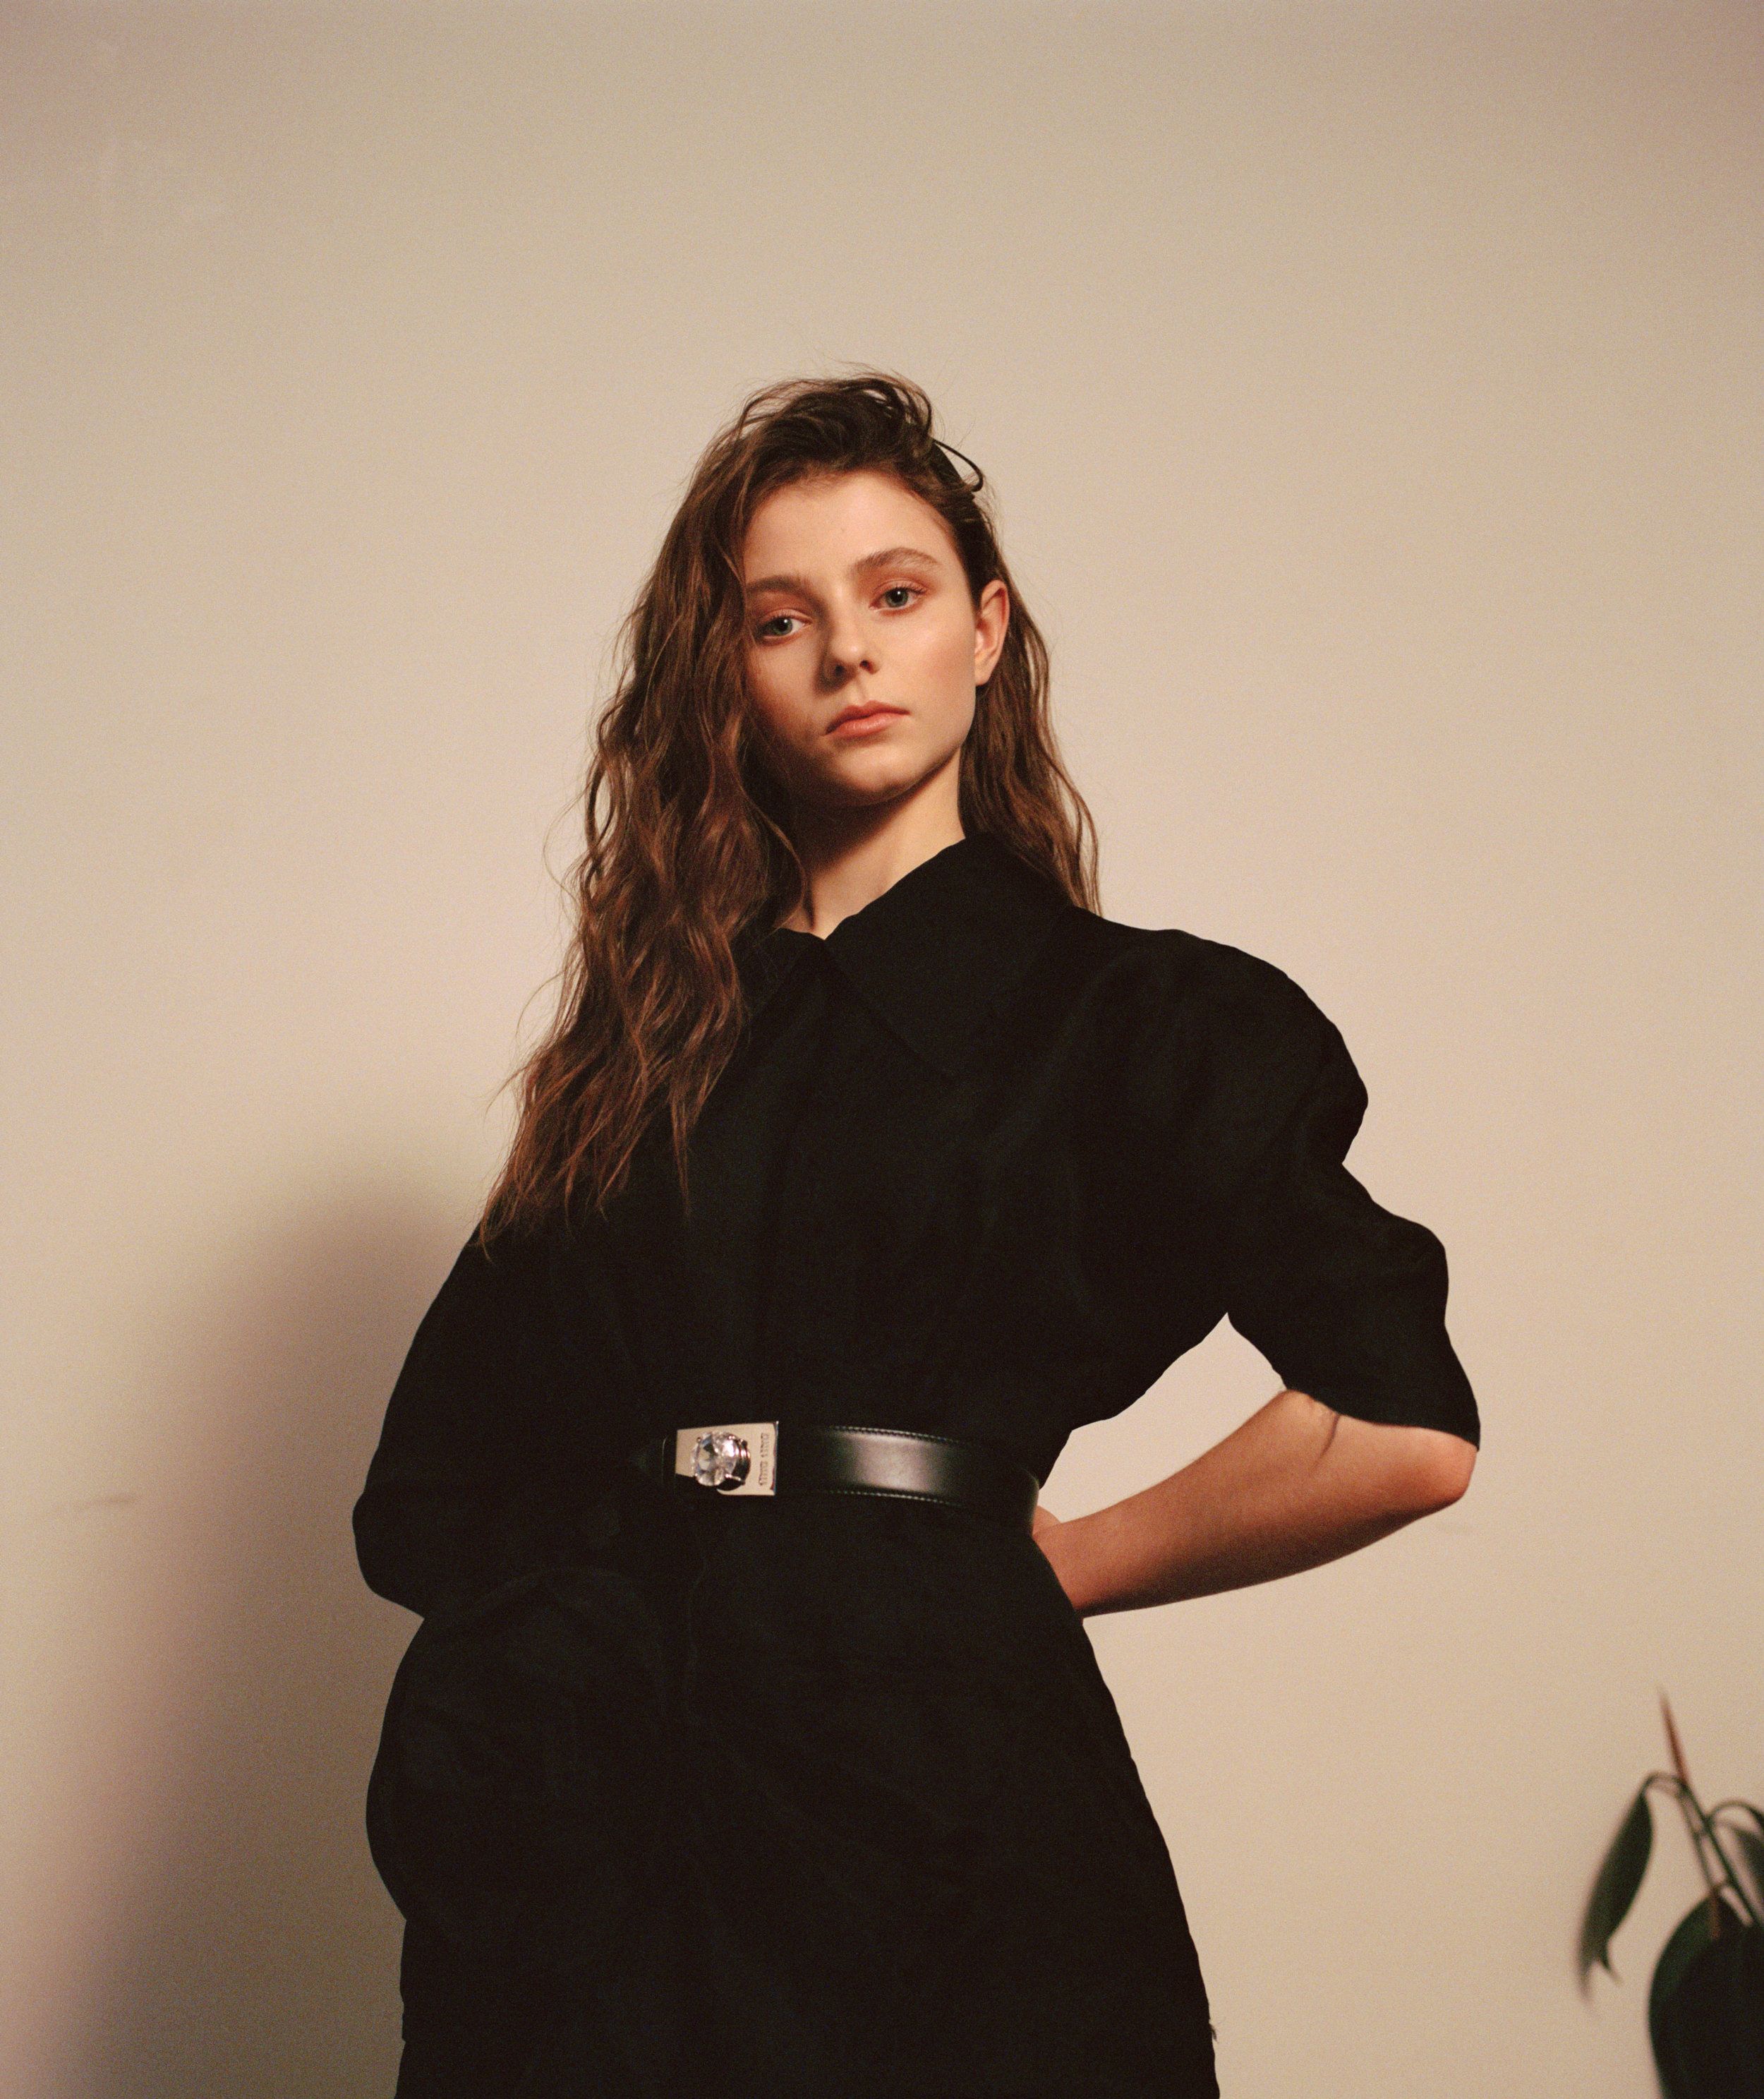 THOMASIN MCKENZIE. A Forest Bird Never Wants a cage